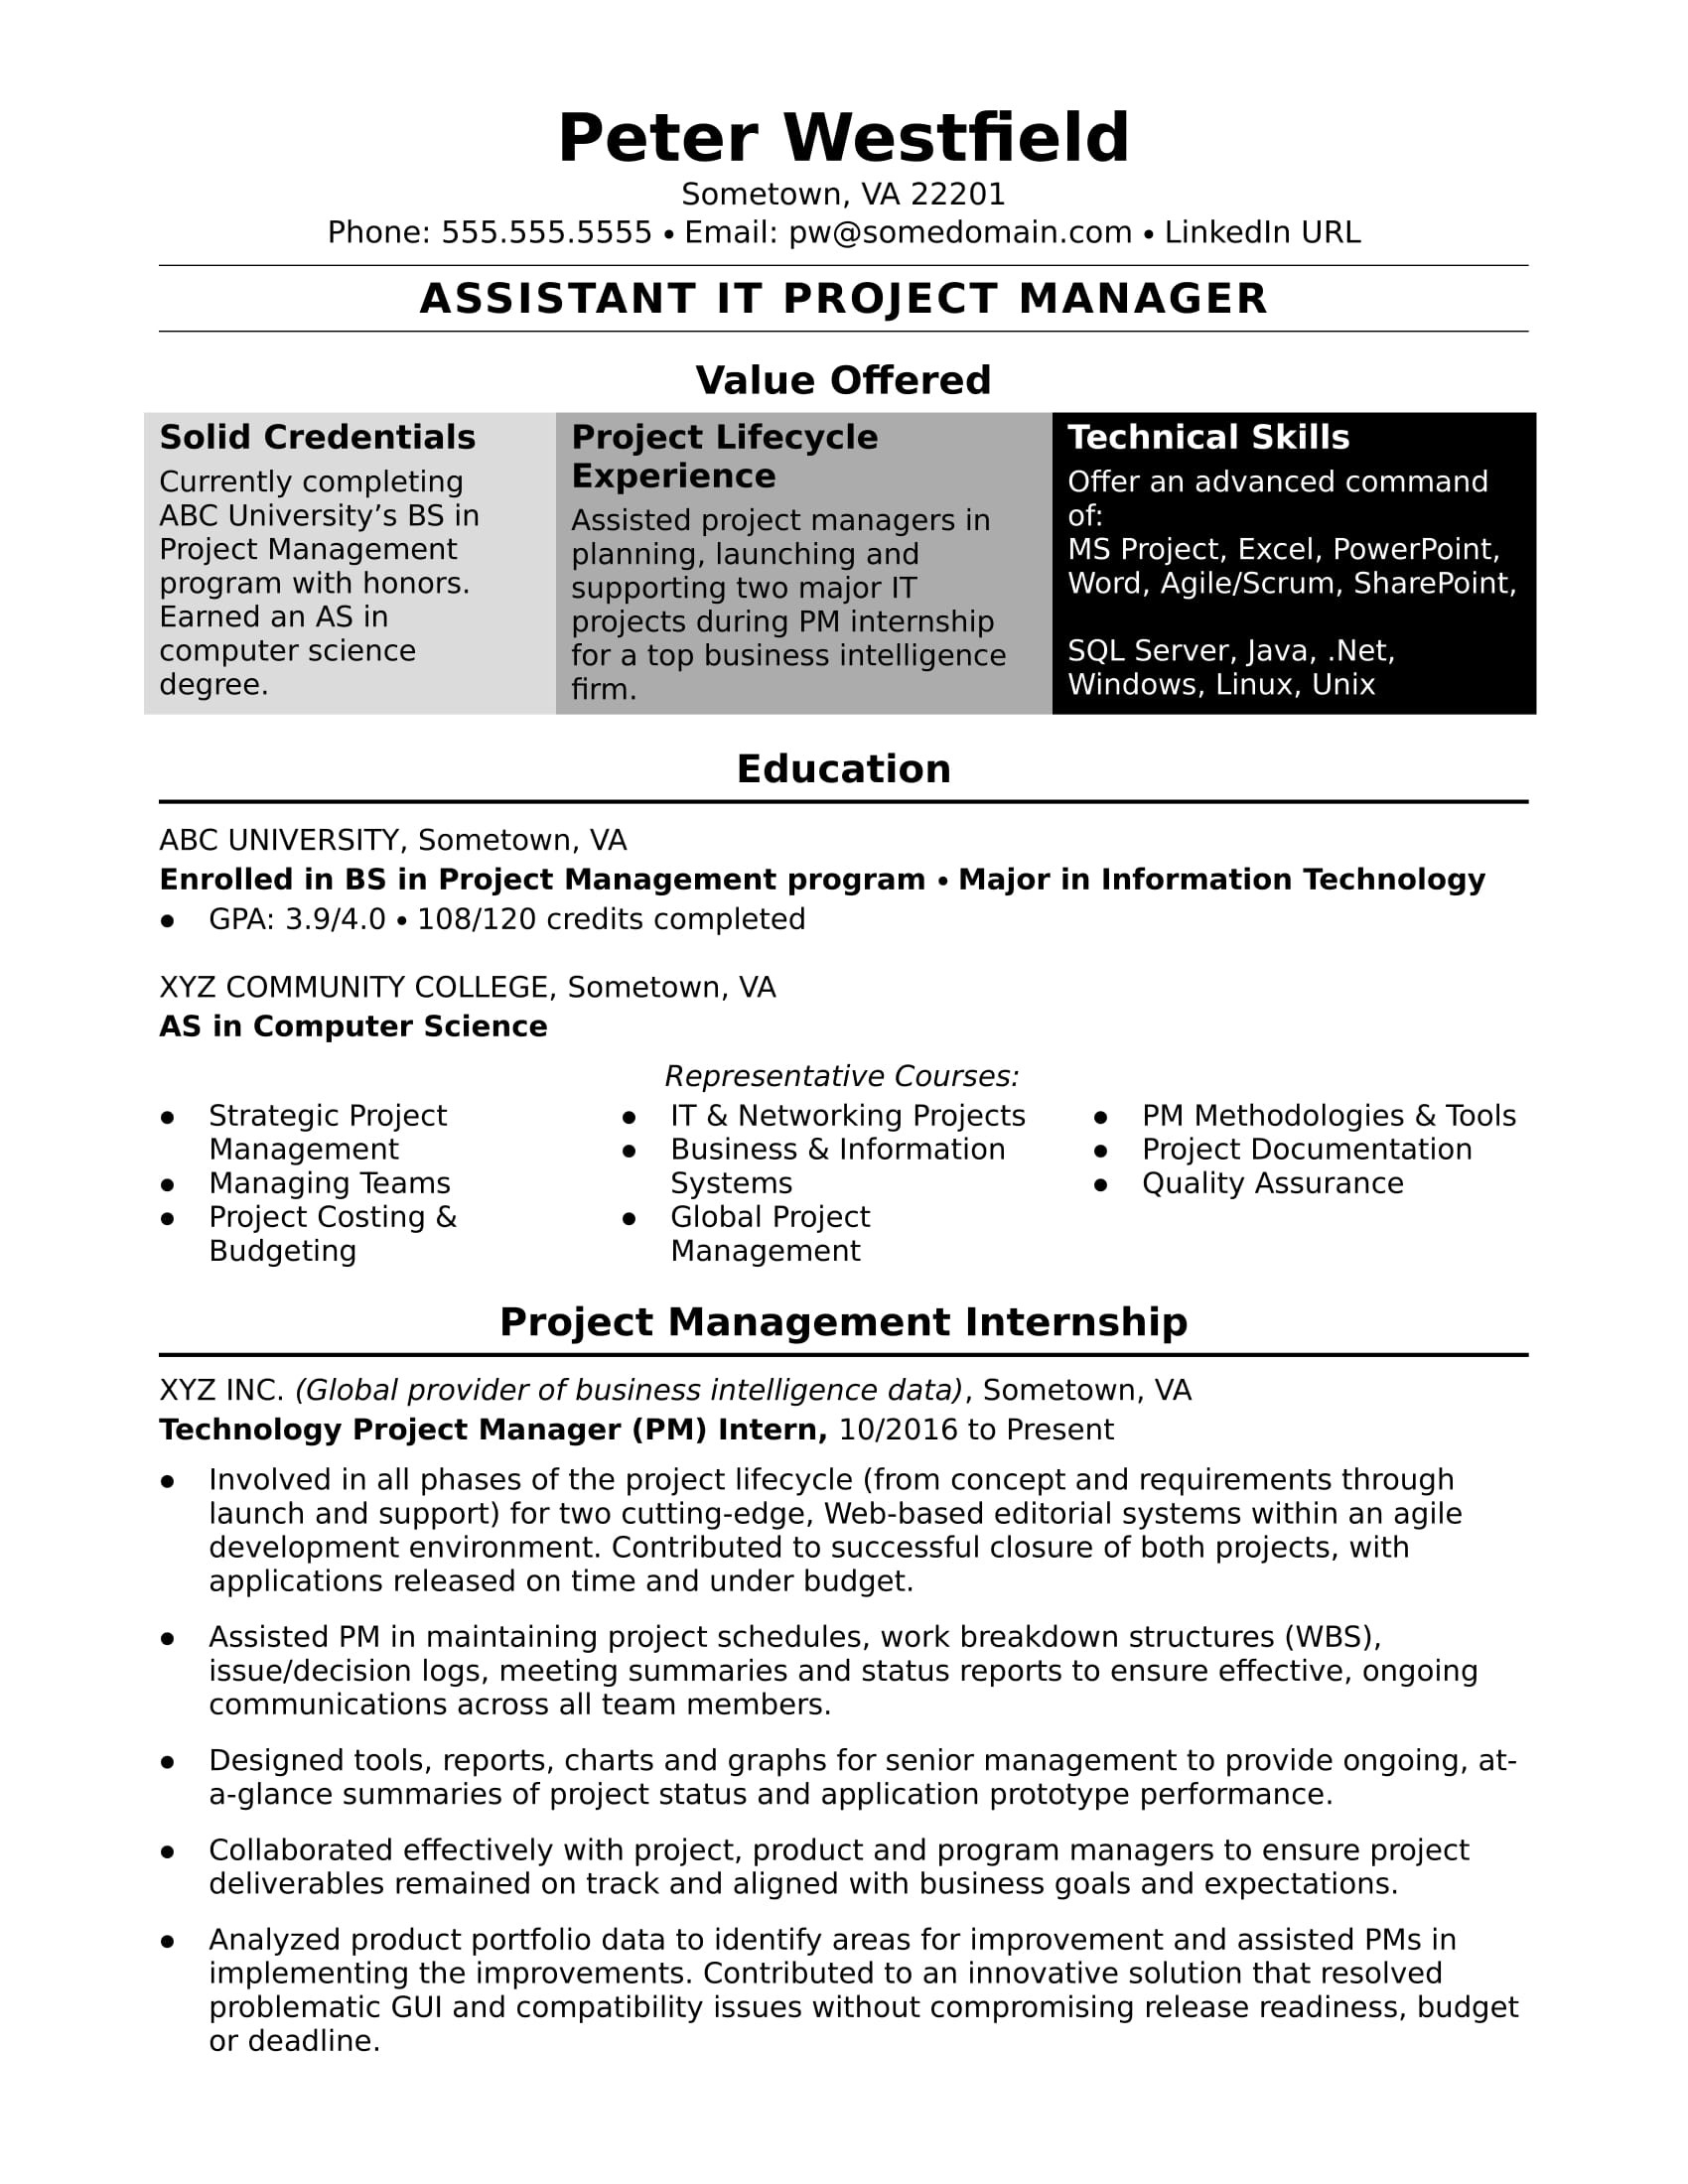 Sample Resume for Entry Level Management Sample Resume for An assistant It Project Manager Monster.com